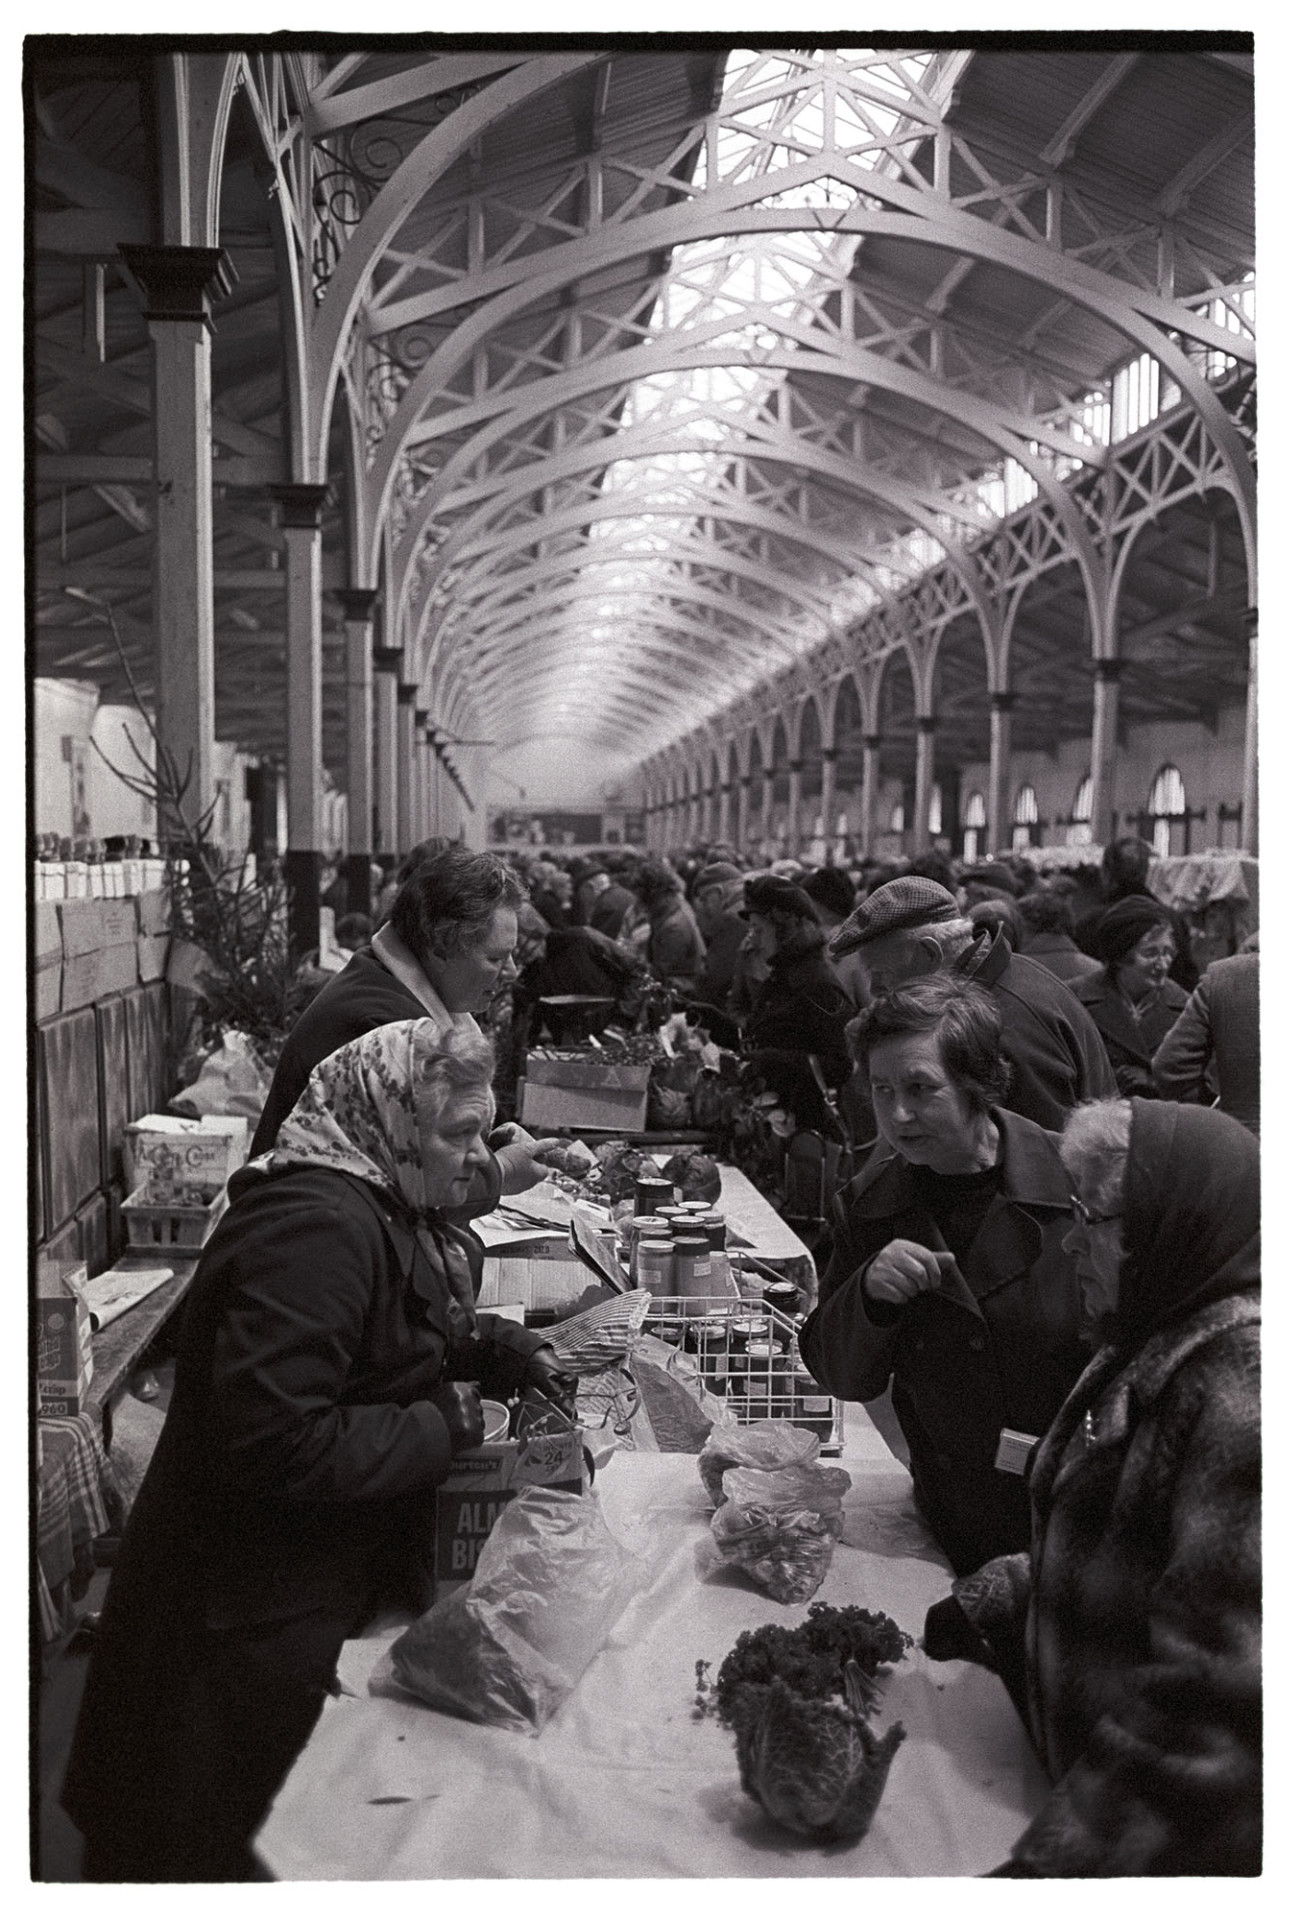 Stall at Pannier Market, women chatting. 
[Three women talking over a stall with vegetables at Barnstaple Pannier Market. Other shoppers and a stall selling jams are visible in the background.]